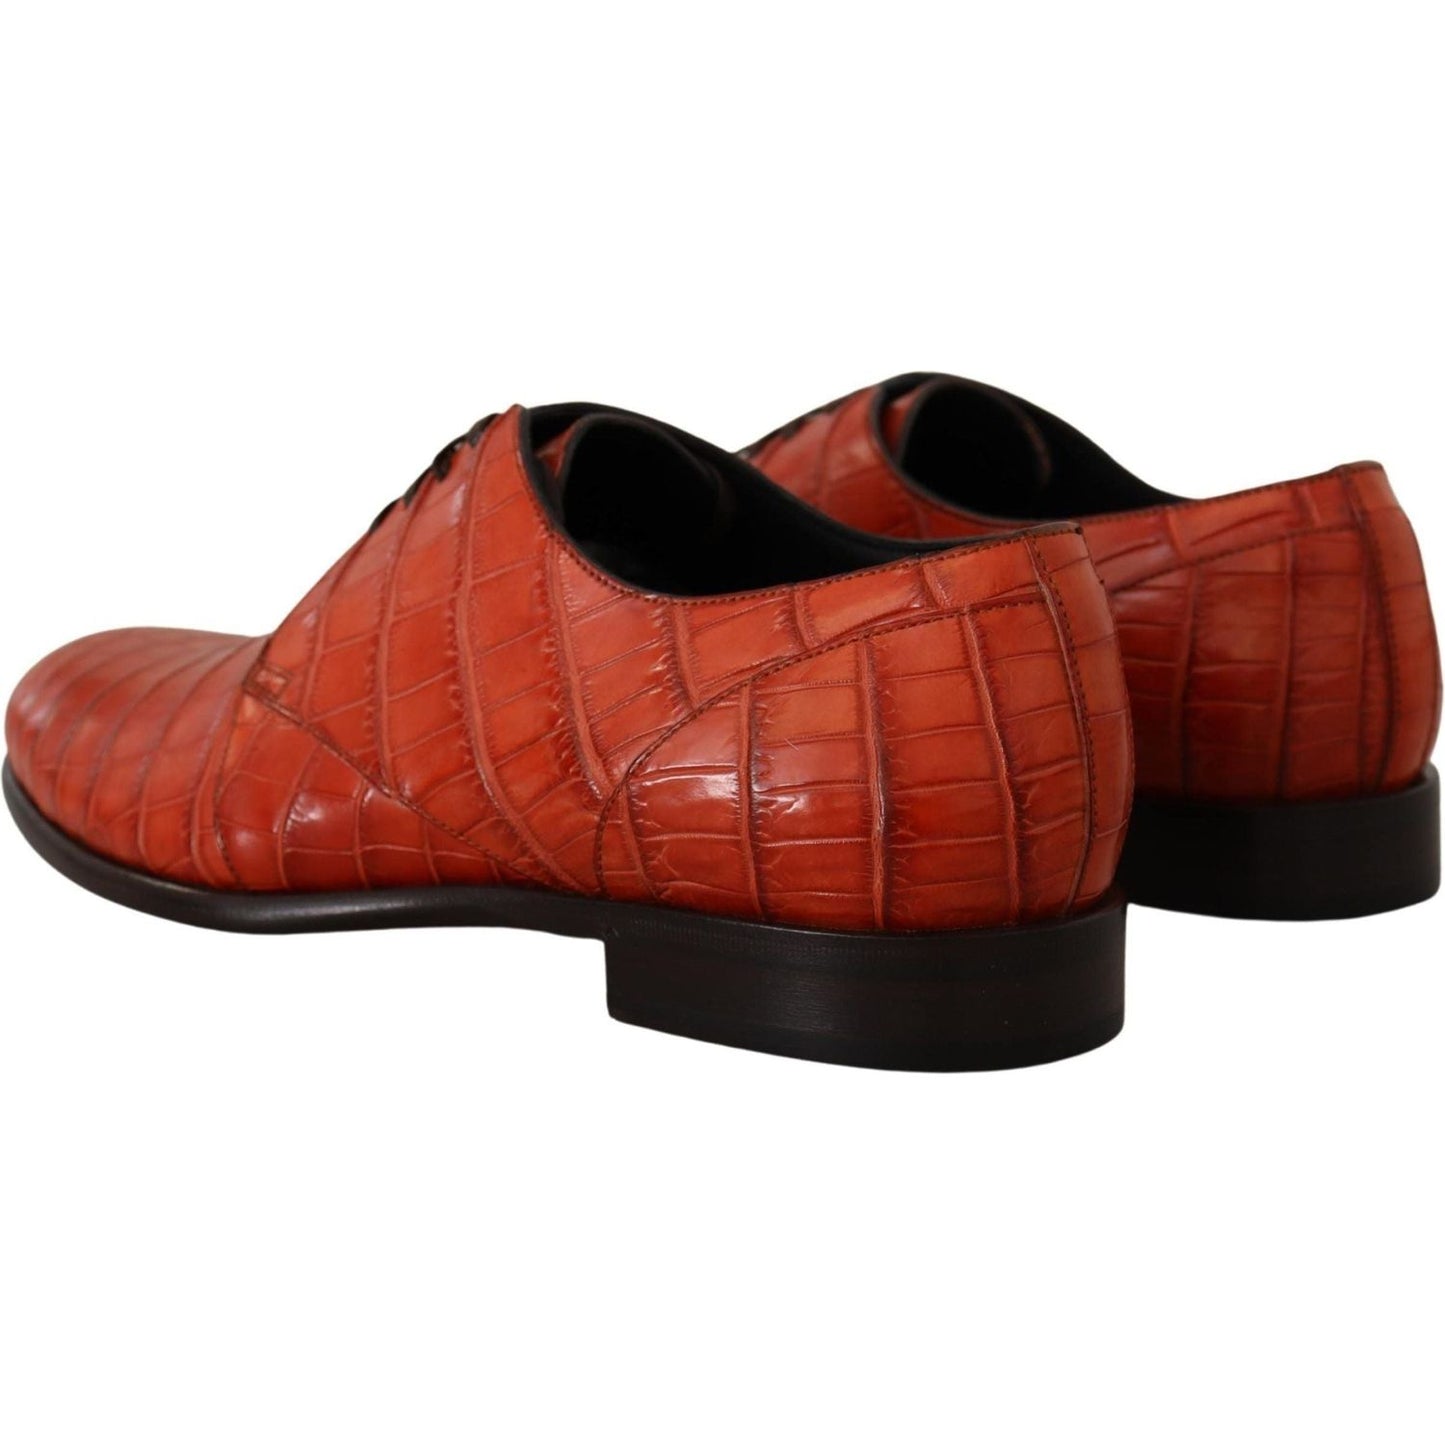 Dolce & Gabbana Exquisite Exotic Croc Leather Lace-Up Dress Shoes orange-exotic-leather-dress-derby-shoes